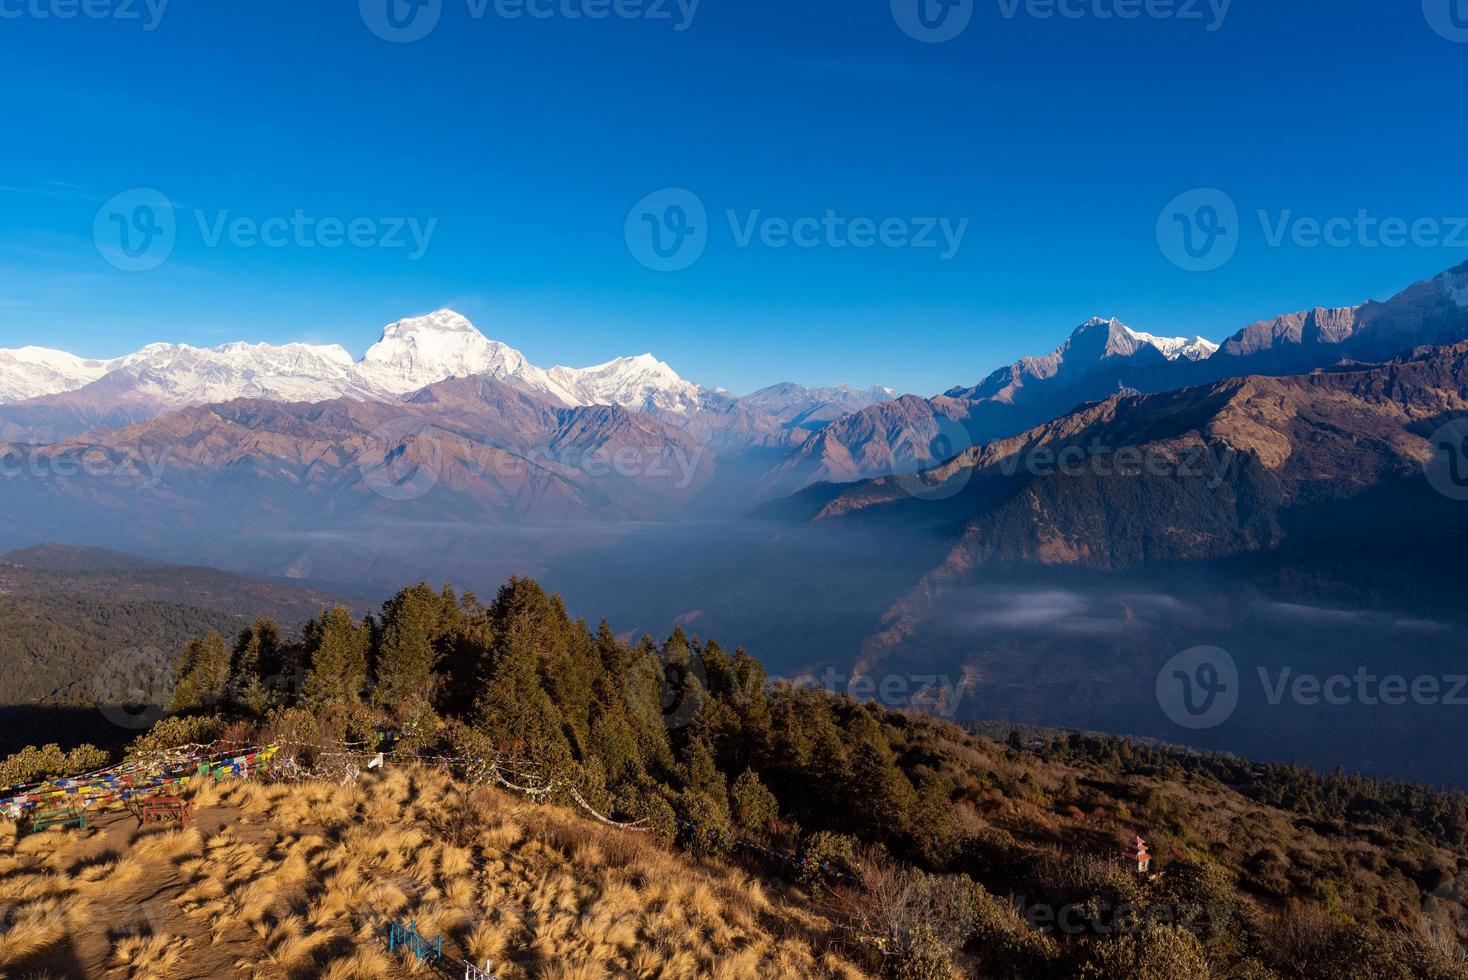 Nature view of Himalayan mountain range at Poon hill view point,Nepal. Poon hill is the famous view point in Gorepani village to see beautiful sunrise over Annapurna mountain range in Nepal photo